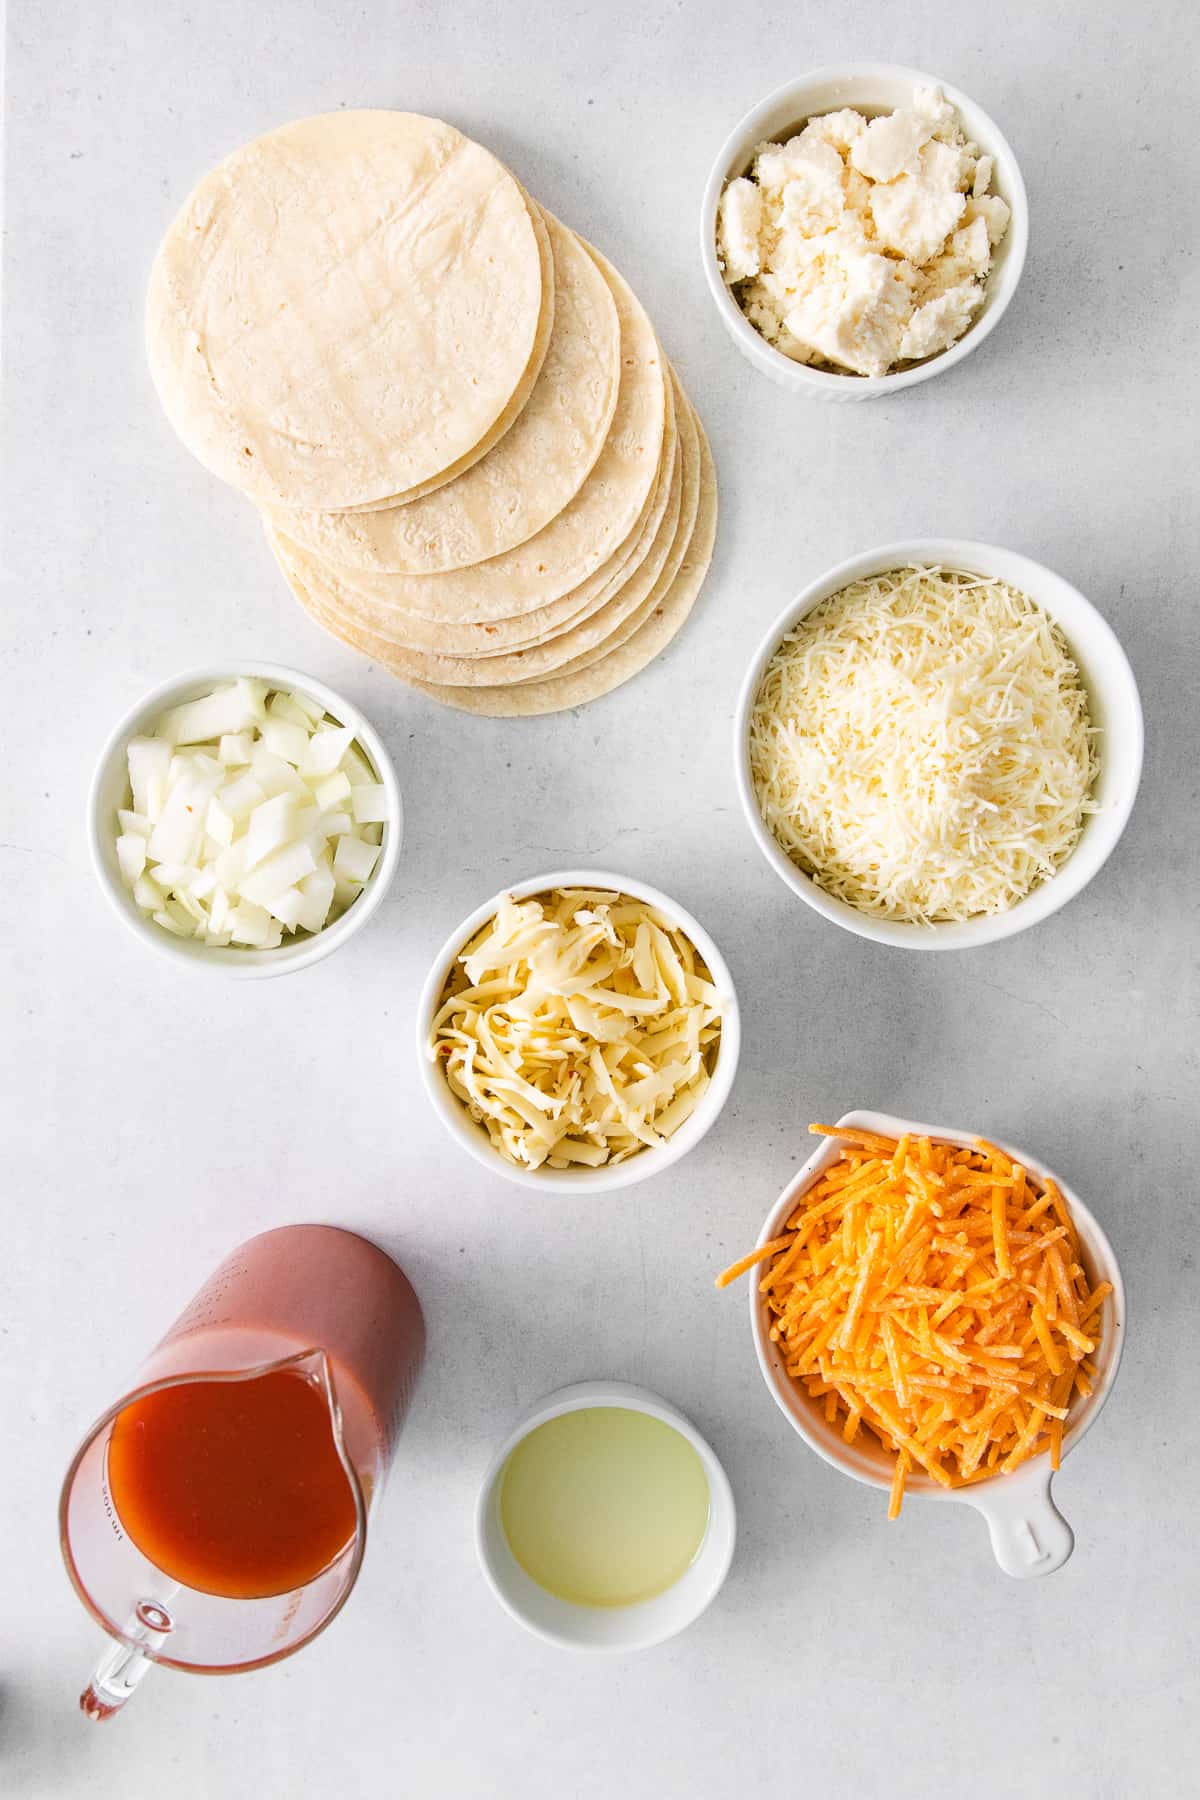 Ingredients for cheese enchiladas in bowls.